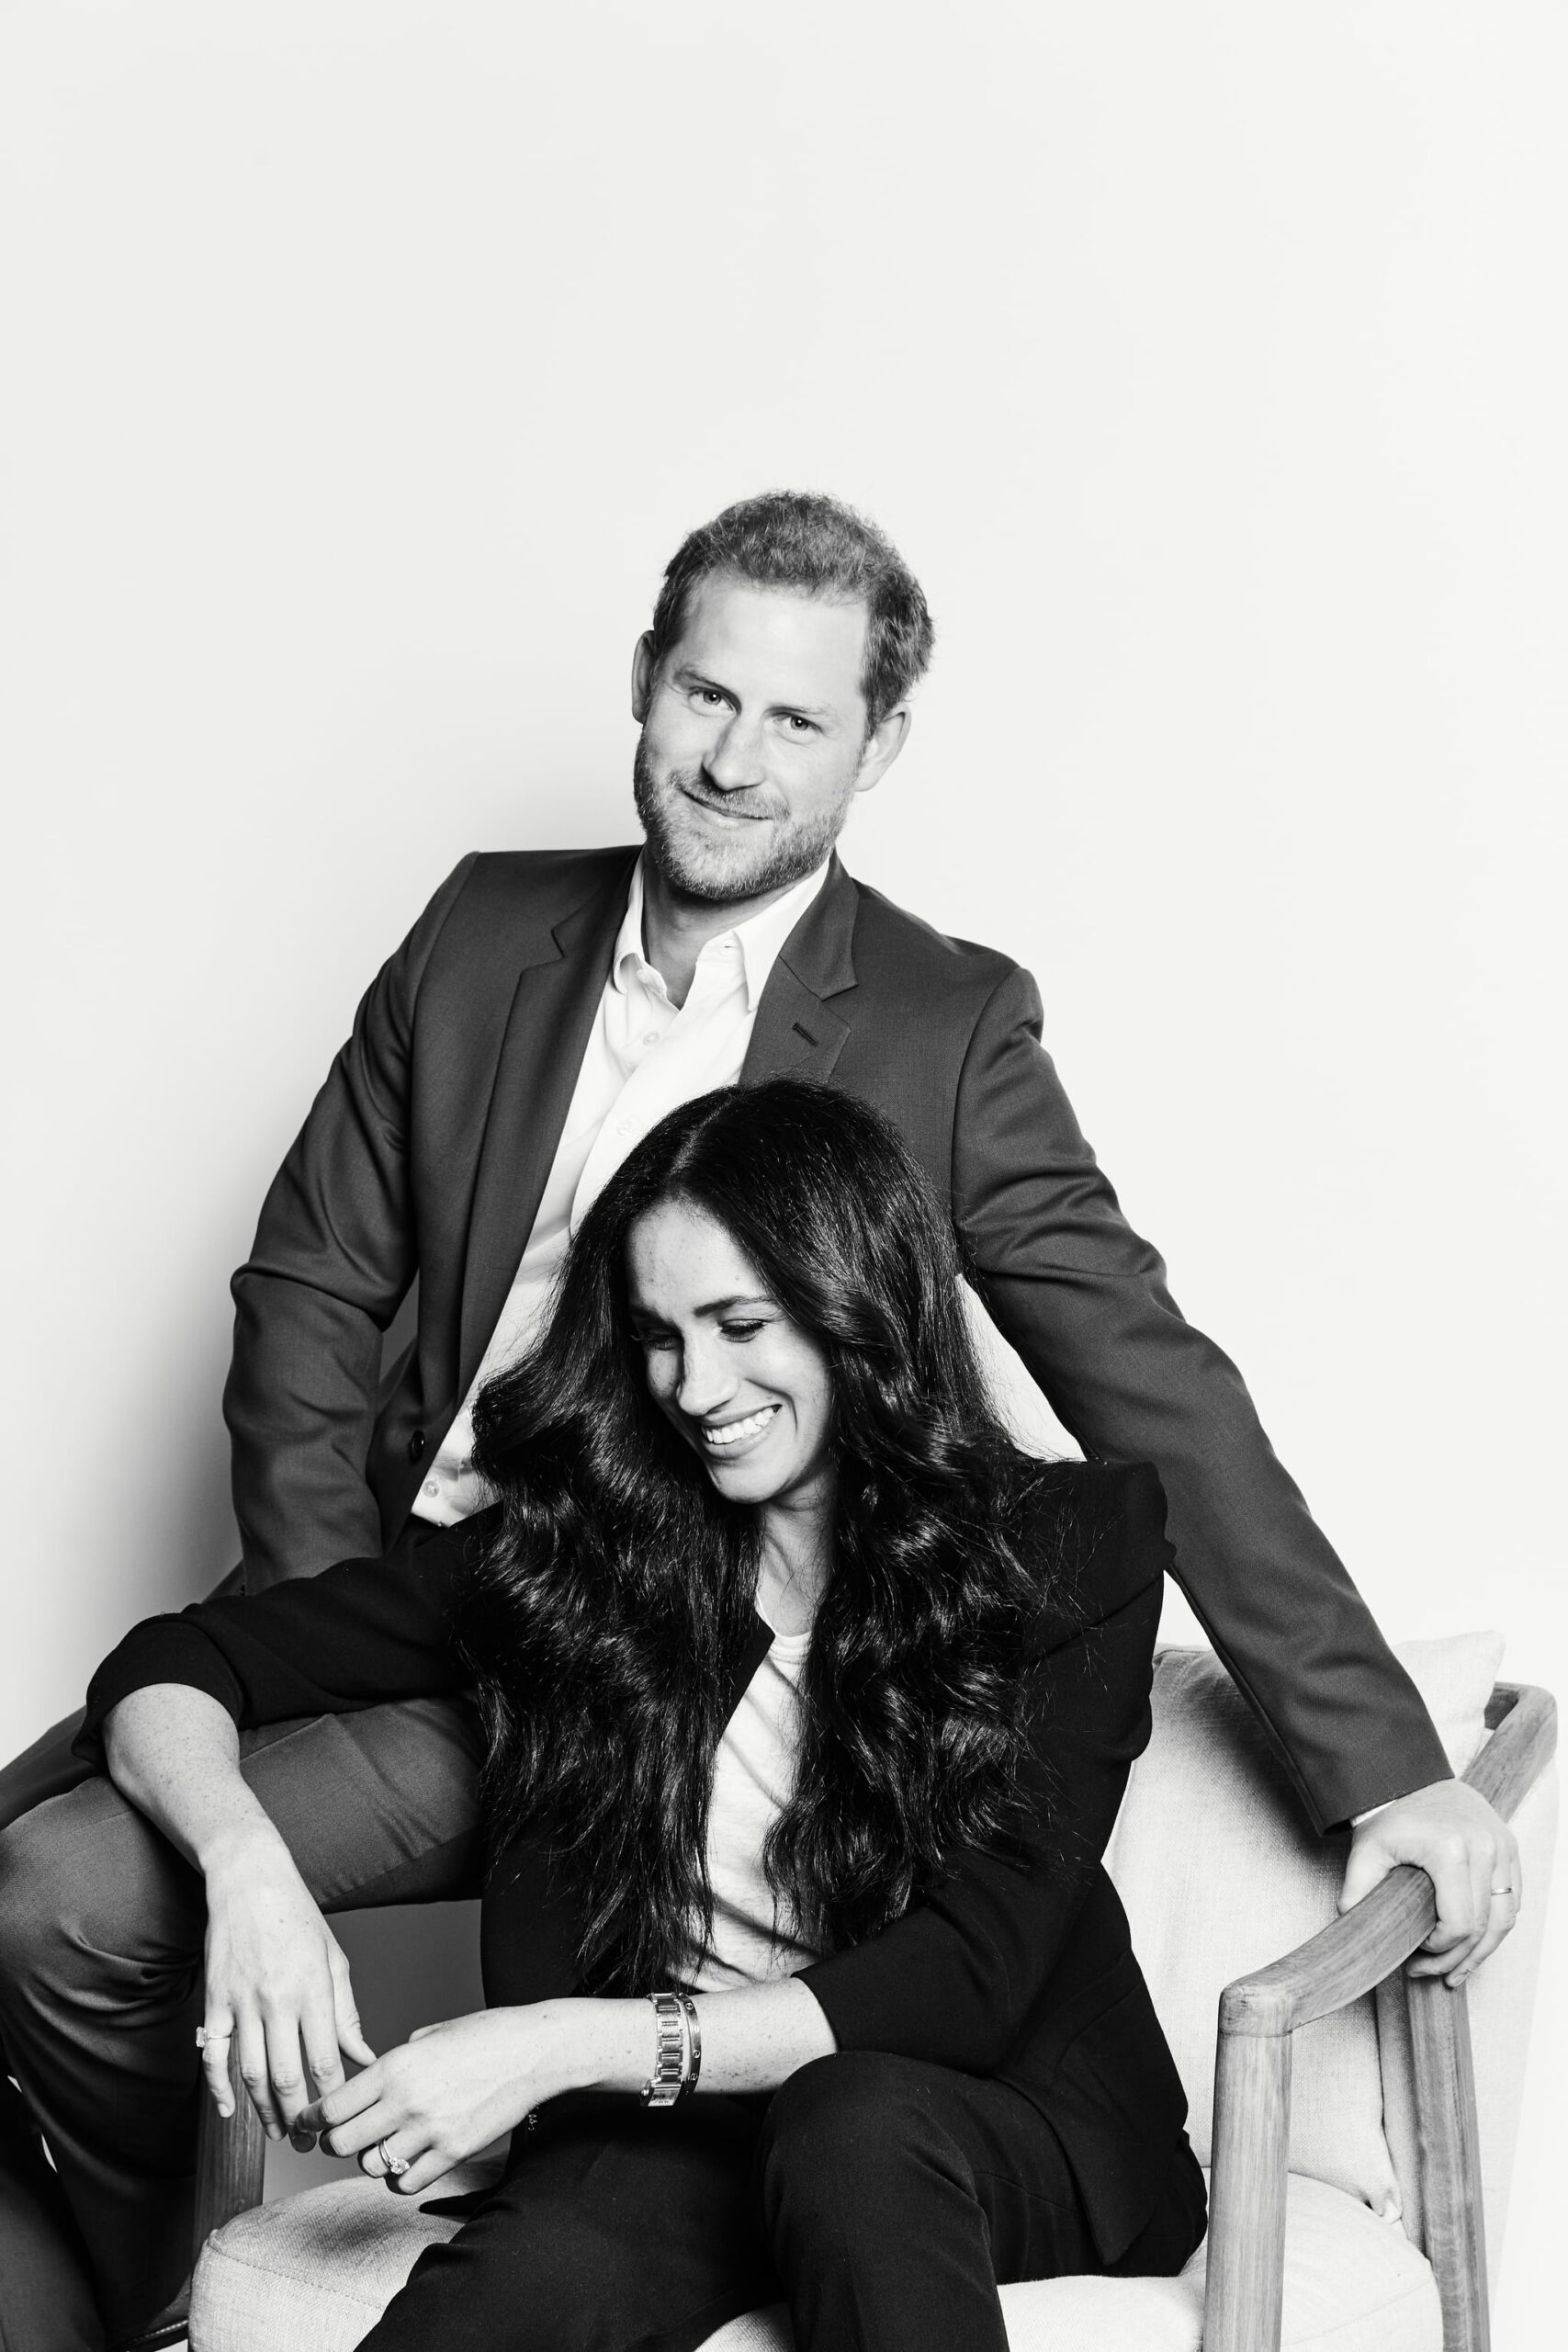 See Prince Harry and Meghan's Time100 Talk Portrait